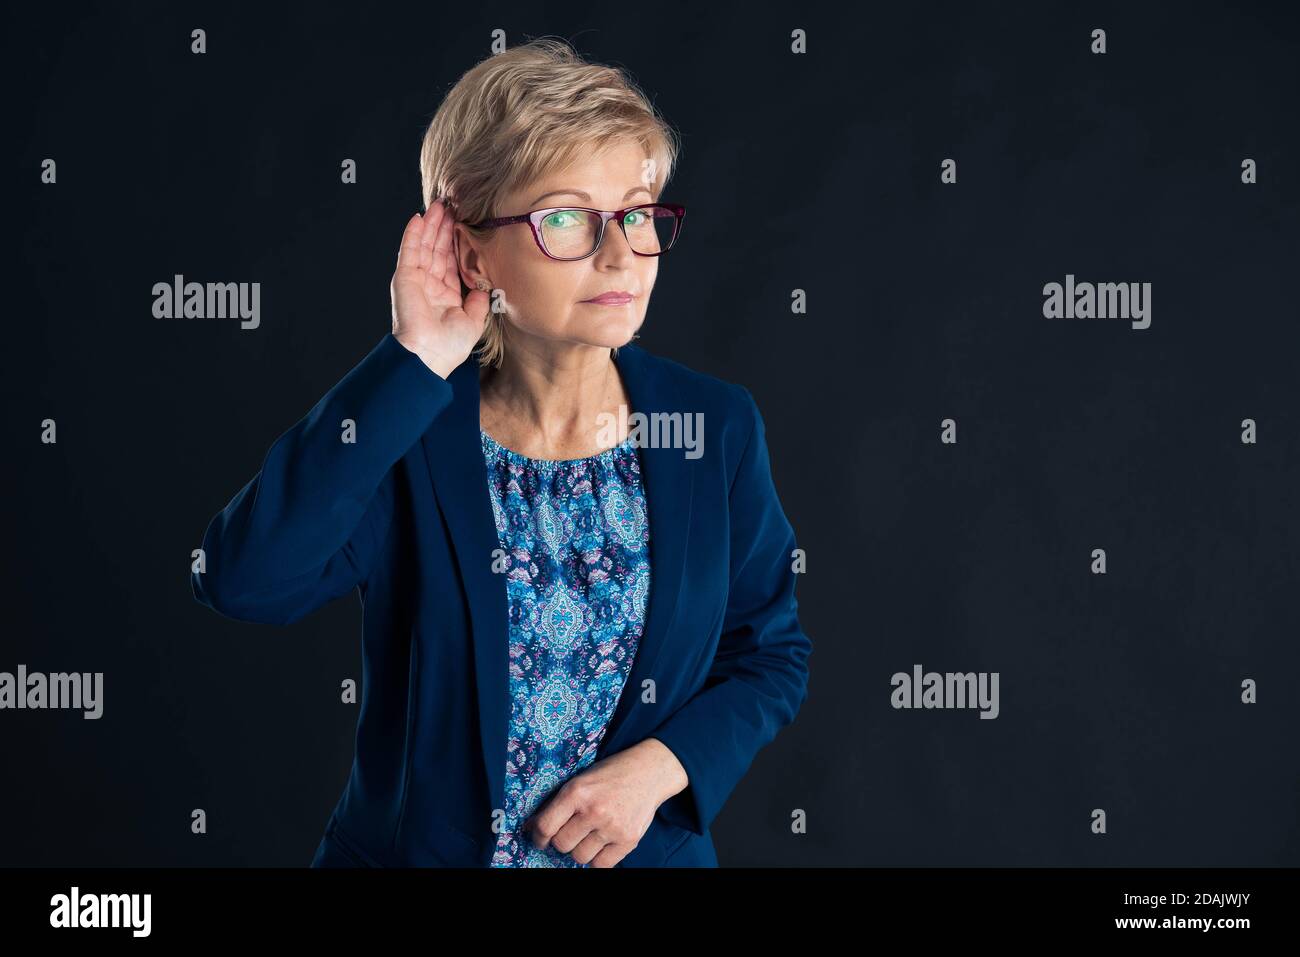 Senior secretary making what did you say gesture on a dark background Stock Photo